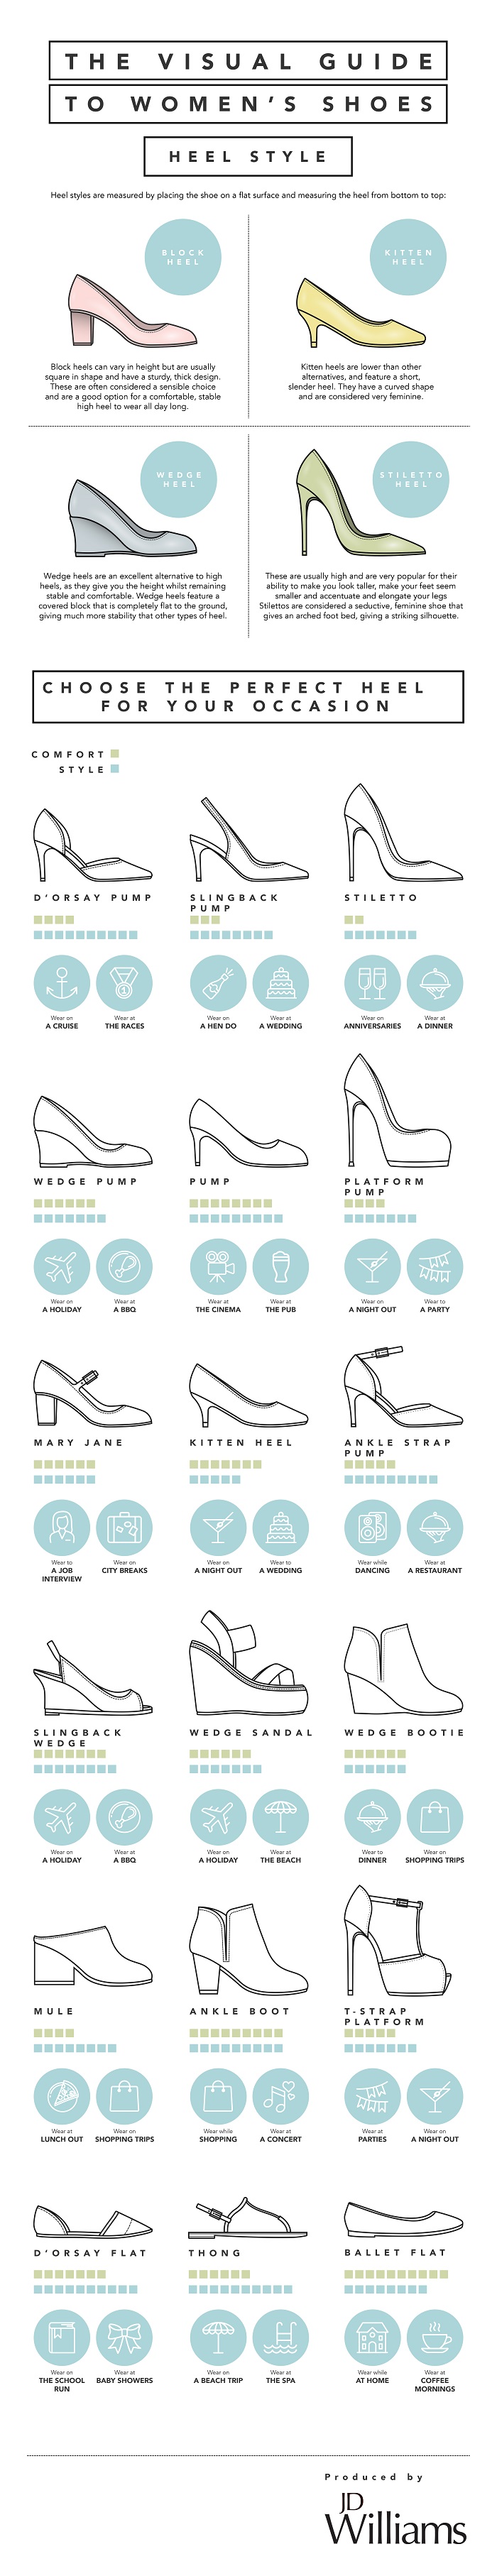 The Visual Guide to Women's Shoes - Heel Style